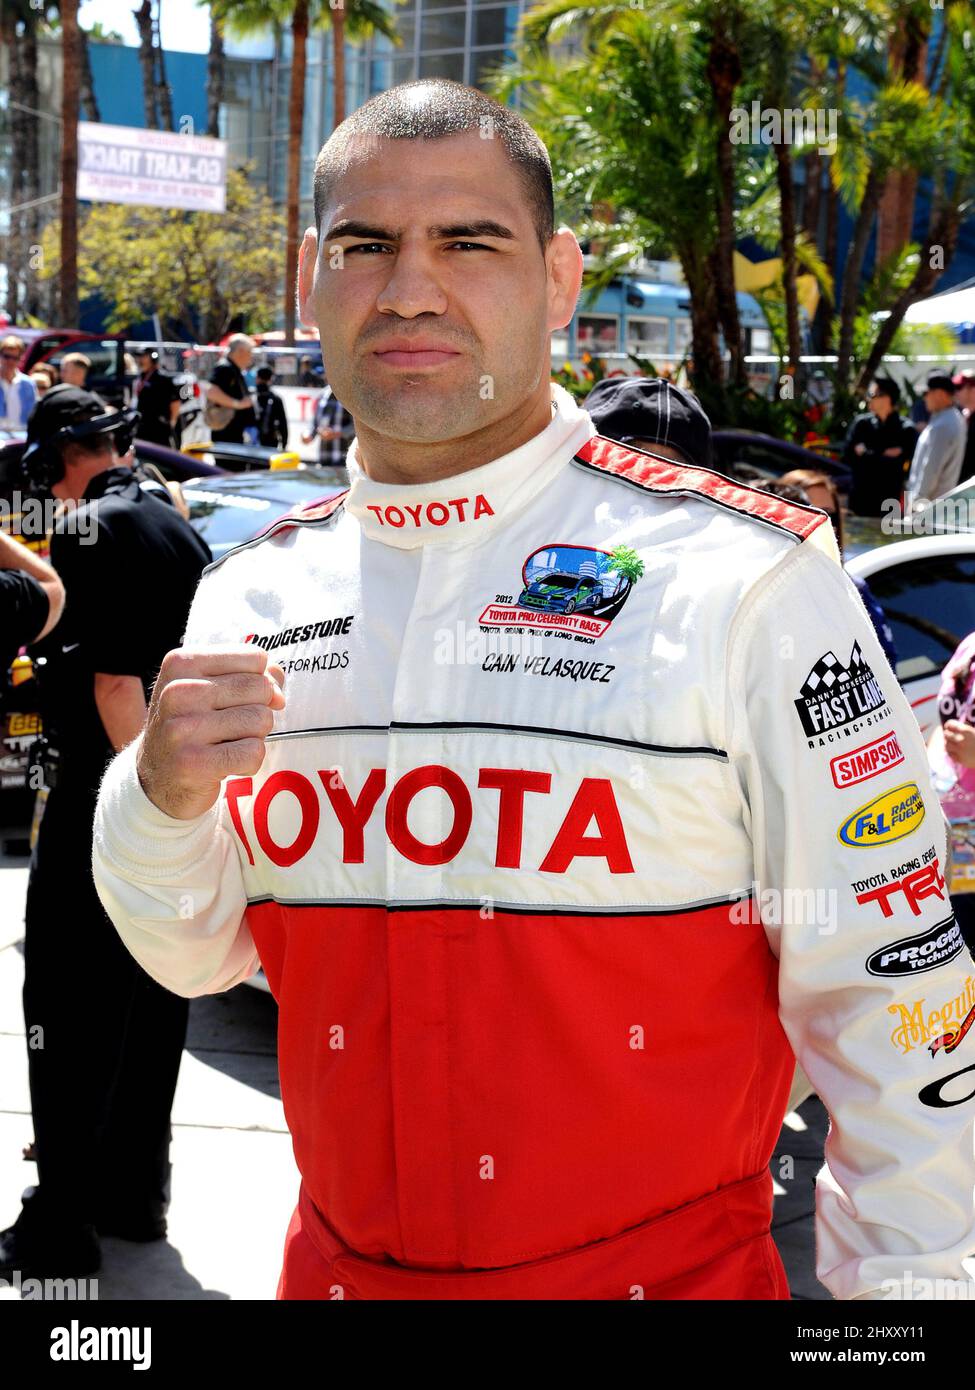 Cain Velasquez attending the 2012 Toyota Grand Prix Celebrity Race held on the streets of Long Beach n California, USA. Stock Photo